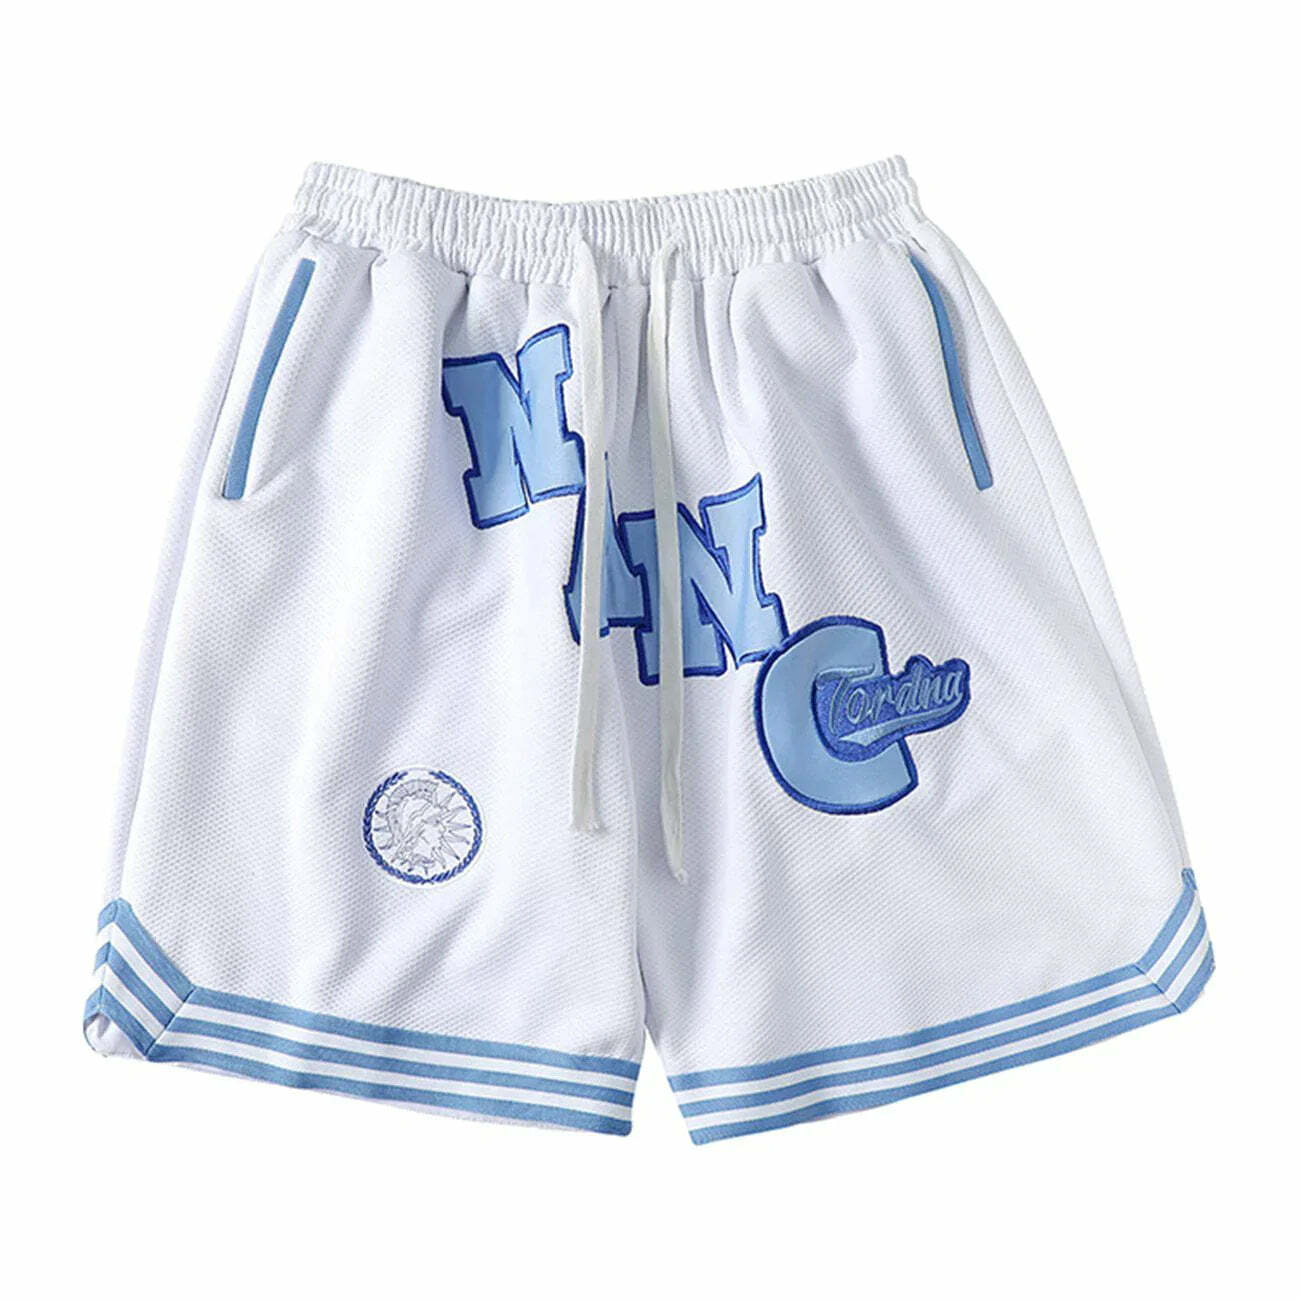 striped embroidered drawstring shorts youthful & trendy 3358